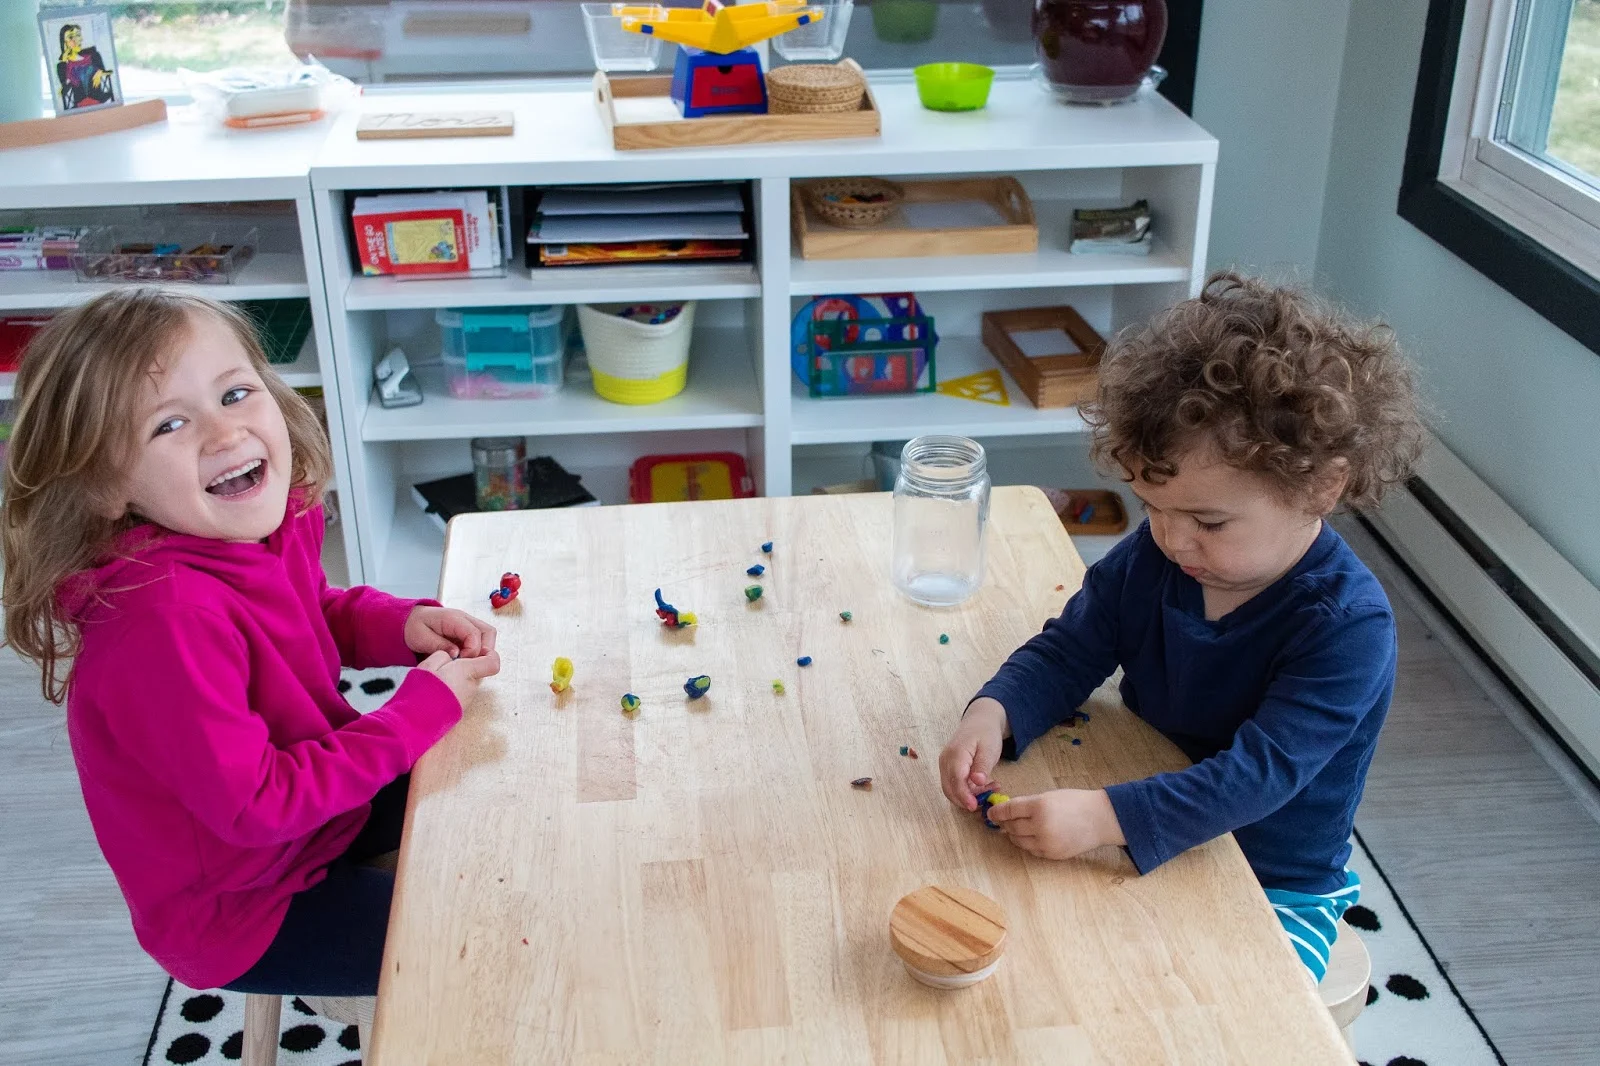 Here is a look at a Montessori work cycle at home and some of the activities that children might choose during that time. 